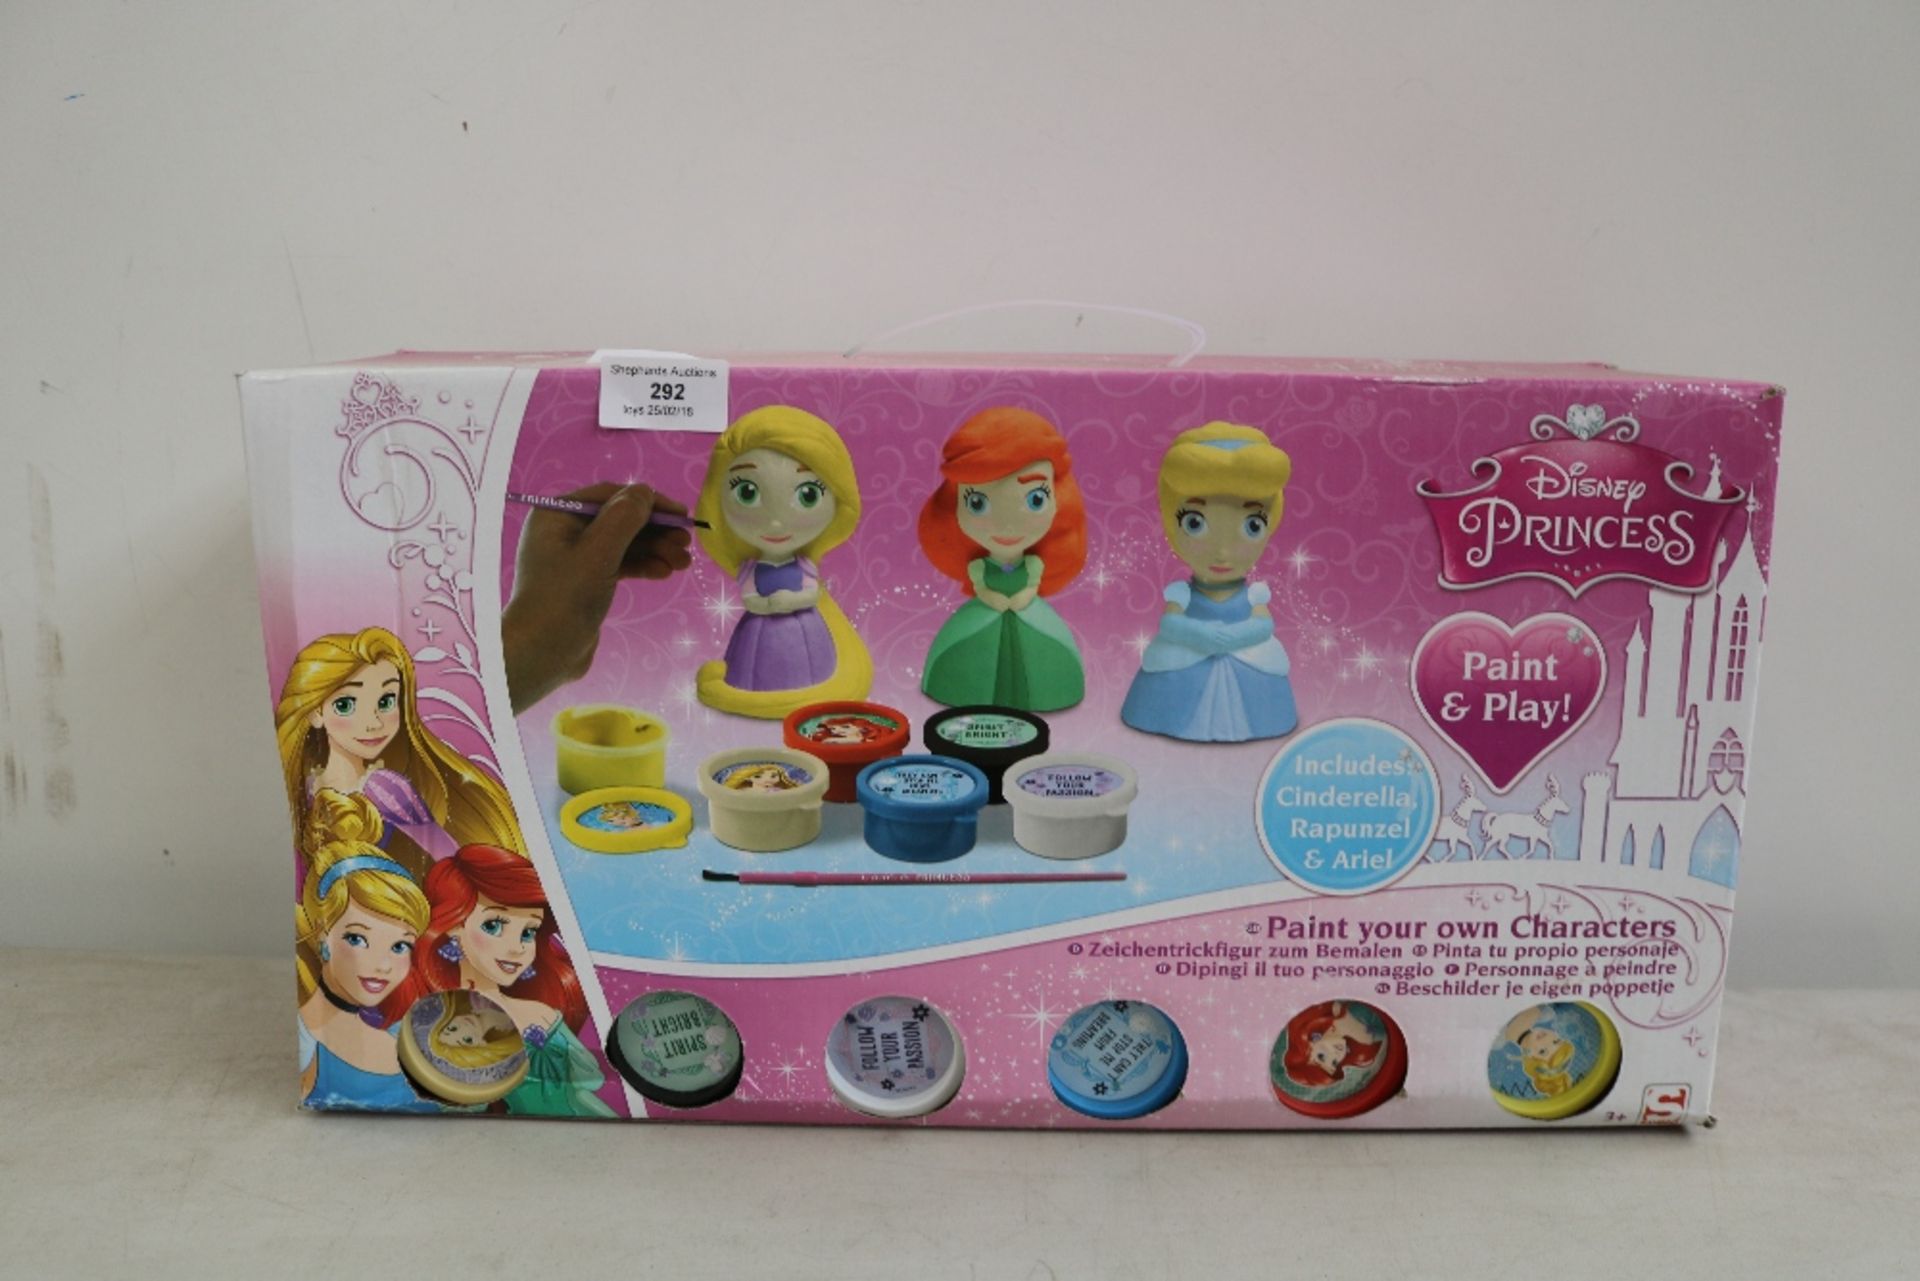 Disney Princess paint your own character set, new and boxed.